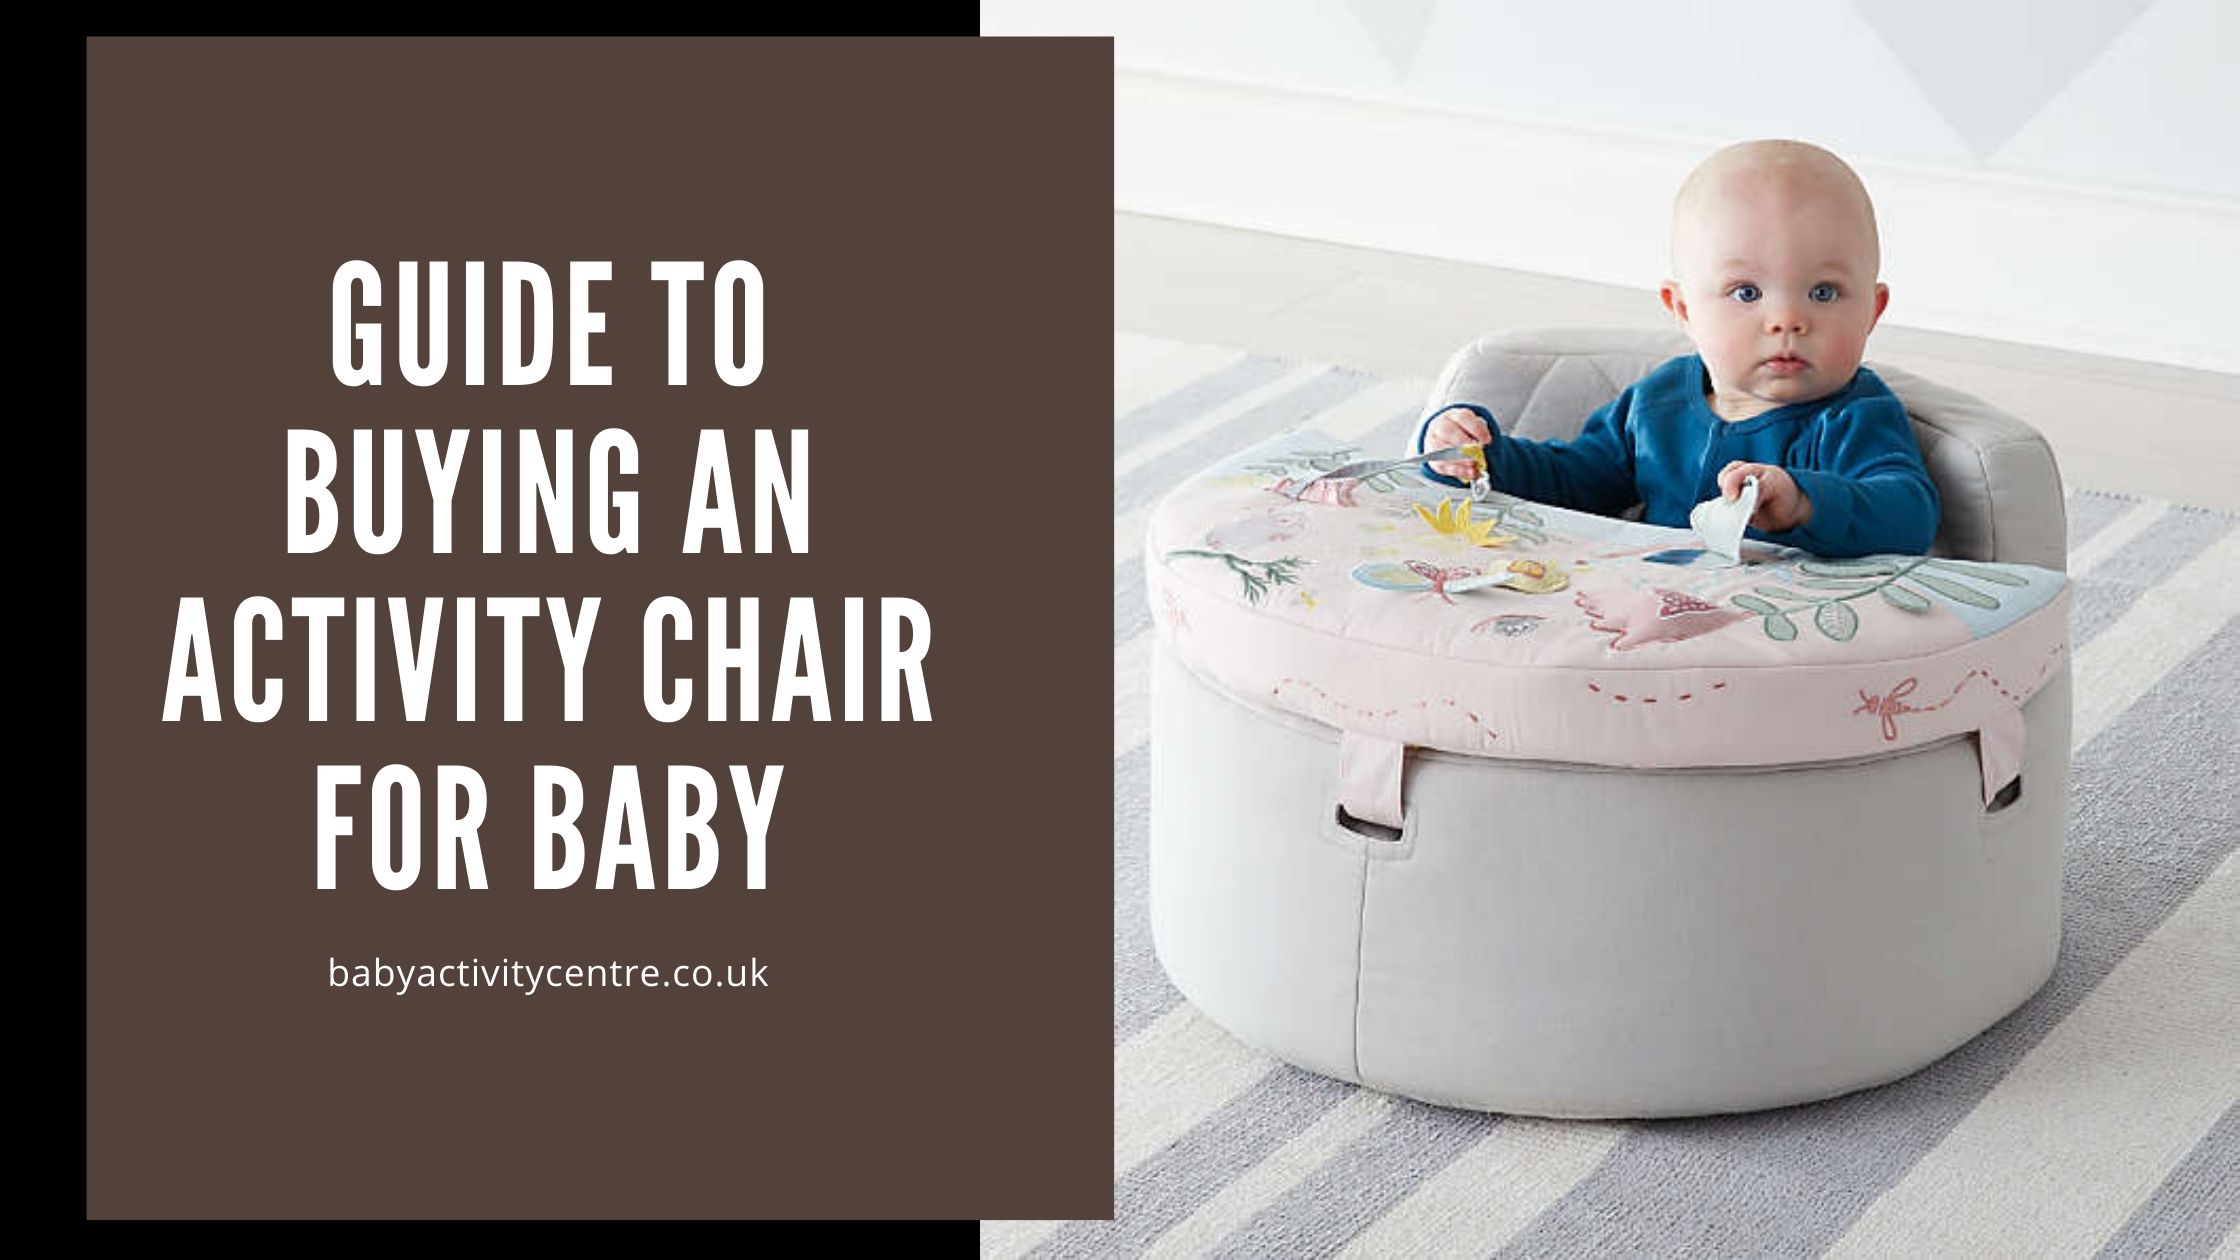 Guide to buying an activity chair for baby